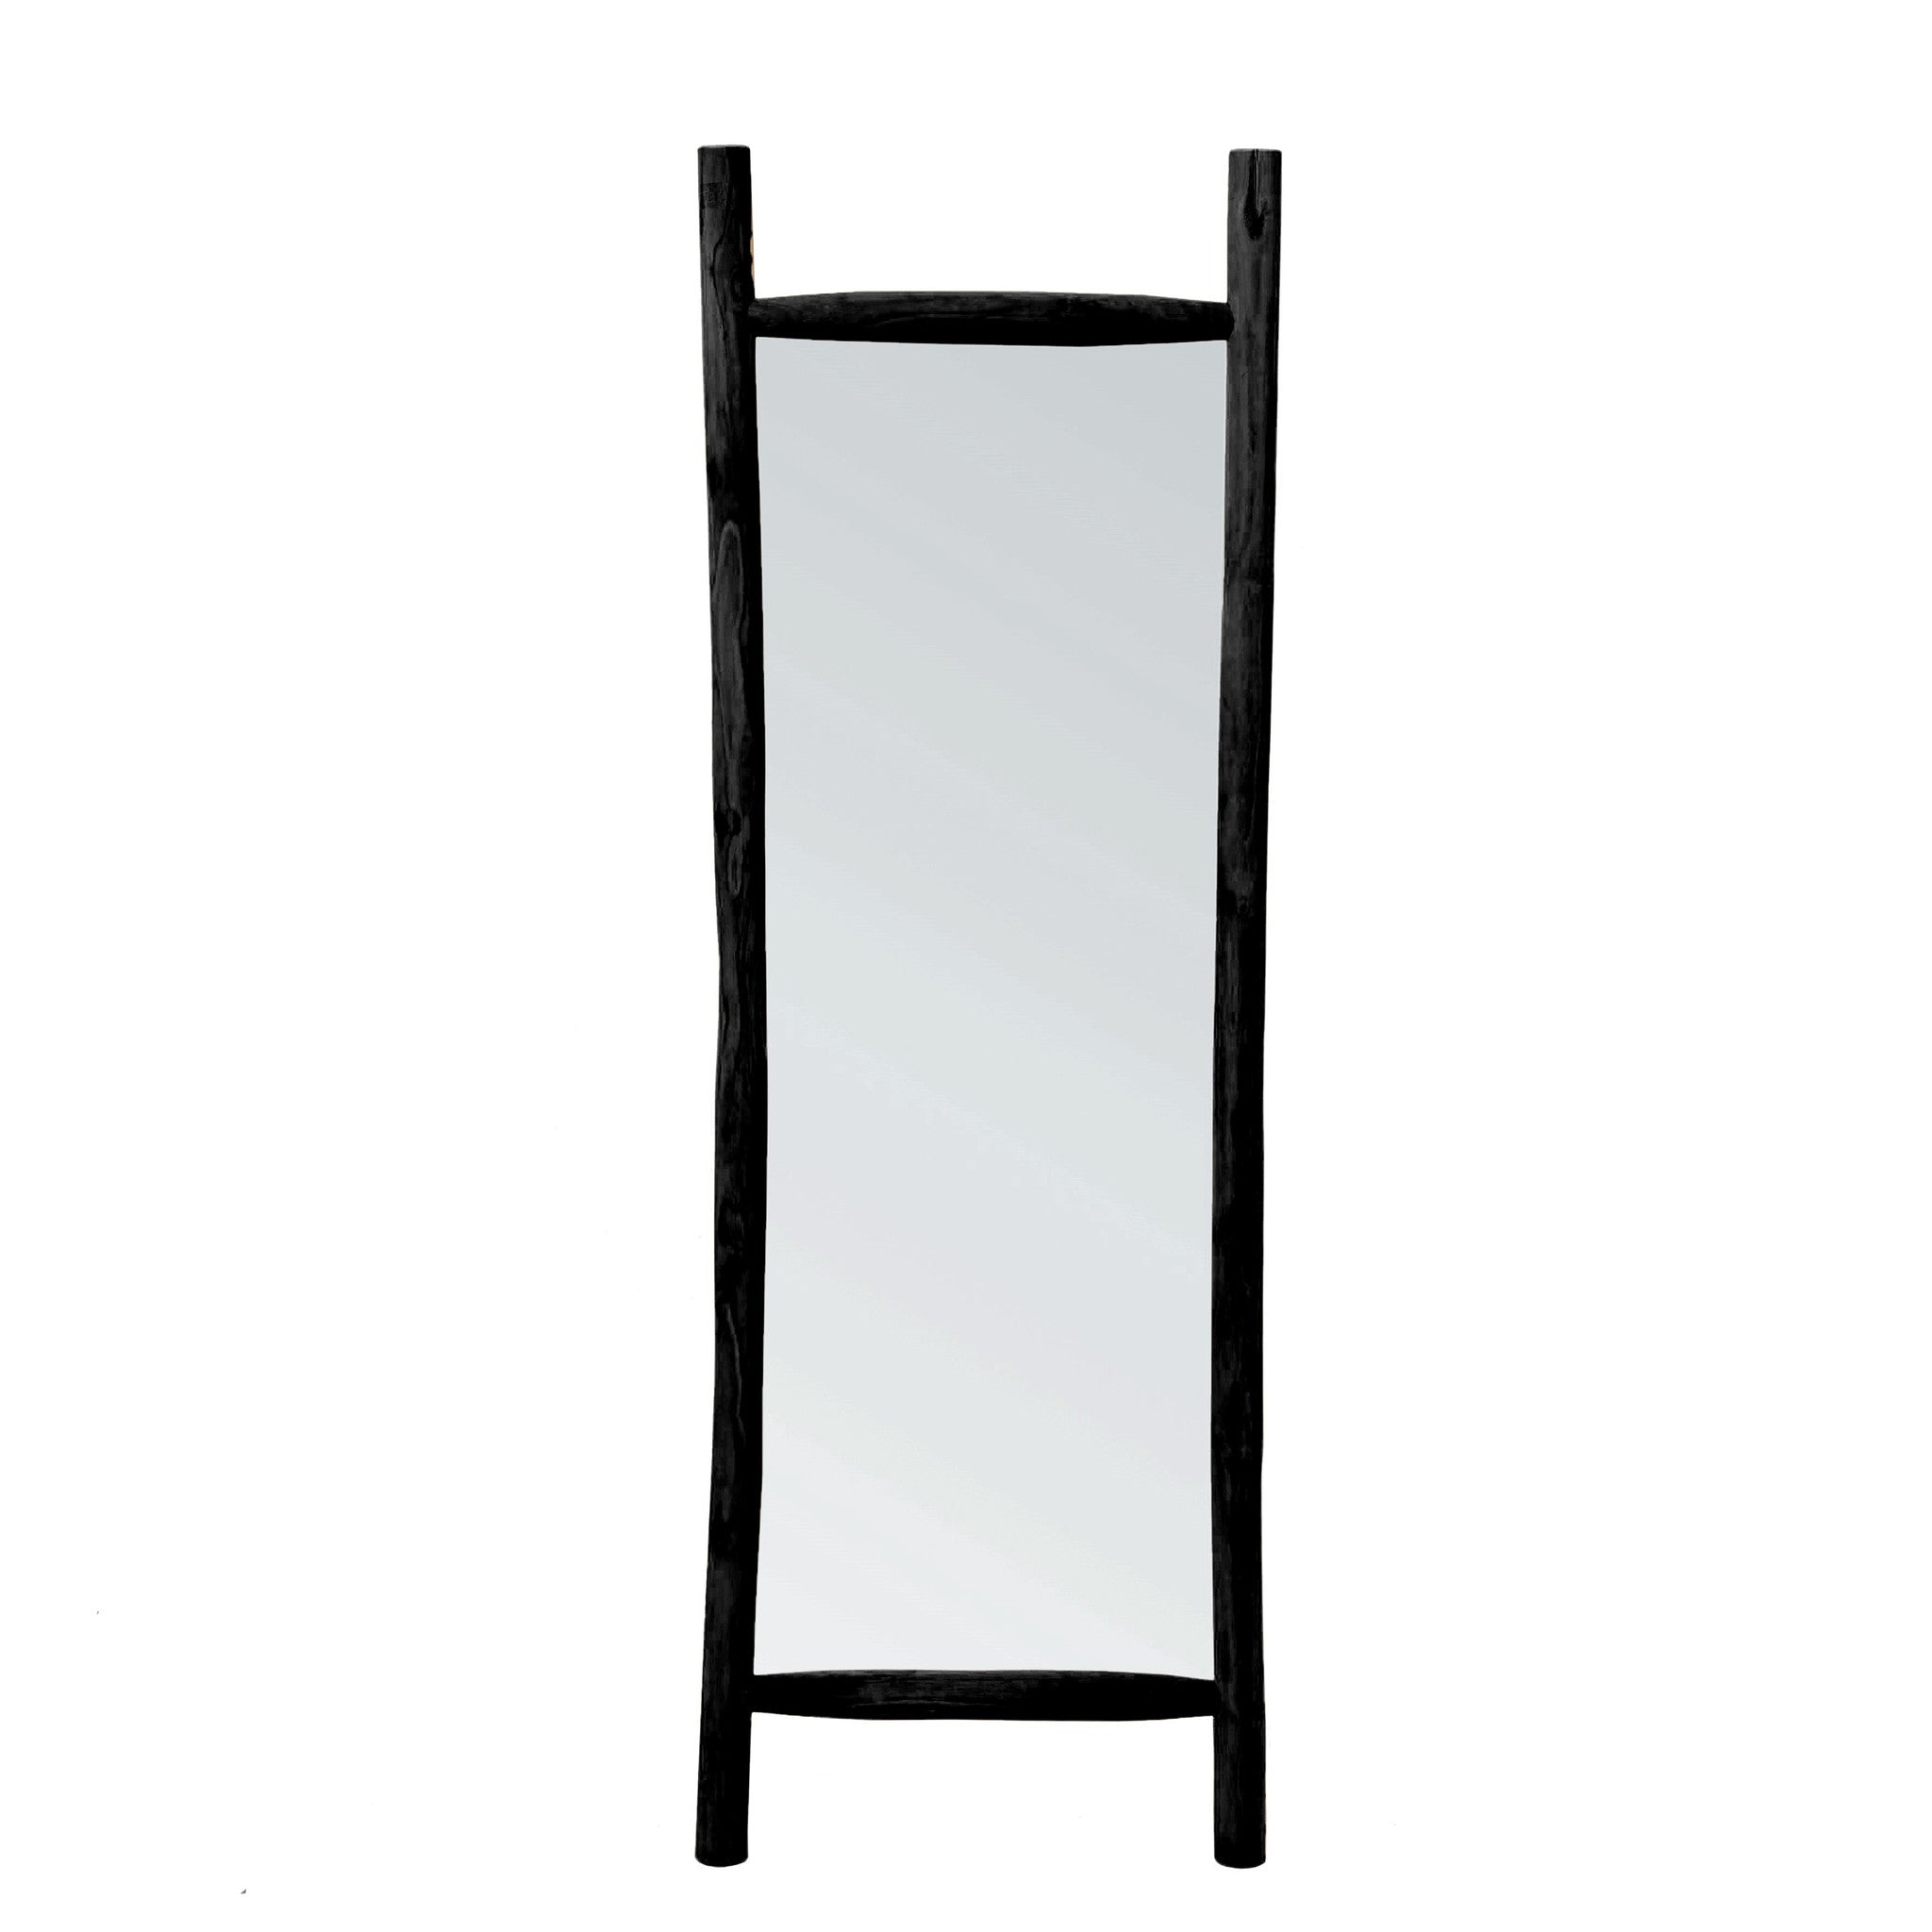 THE ISLAND DRESSING ROOM Mirror Black  front view